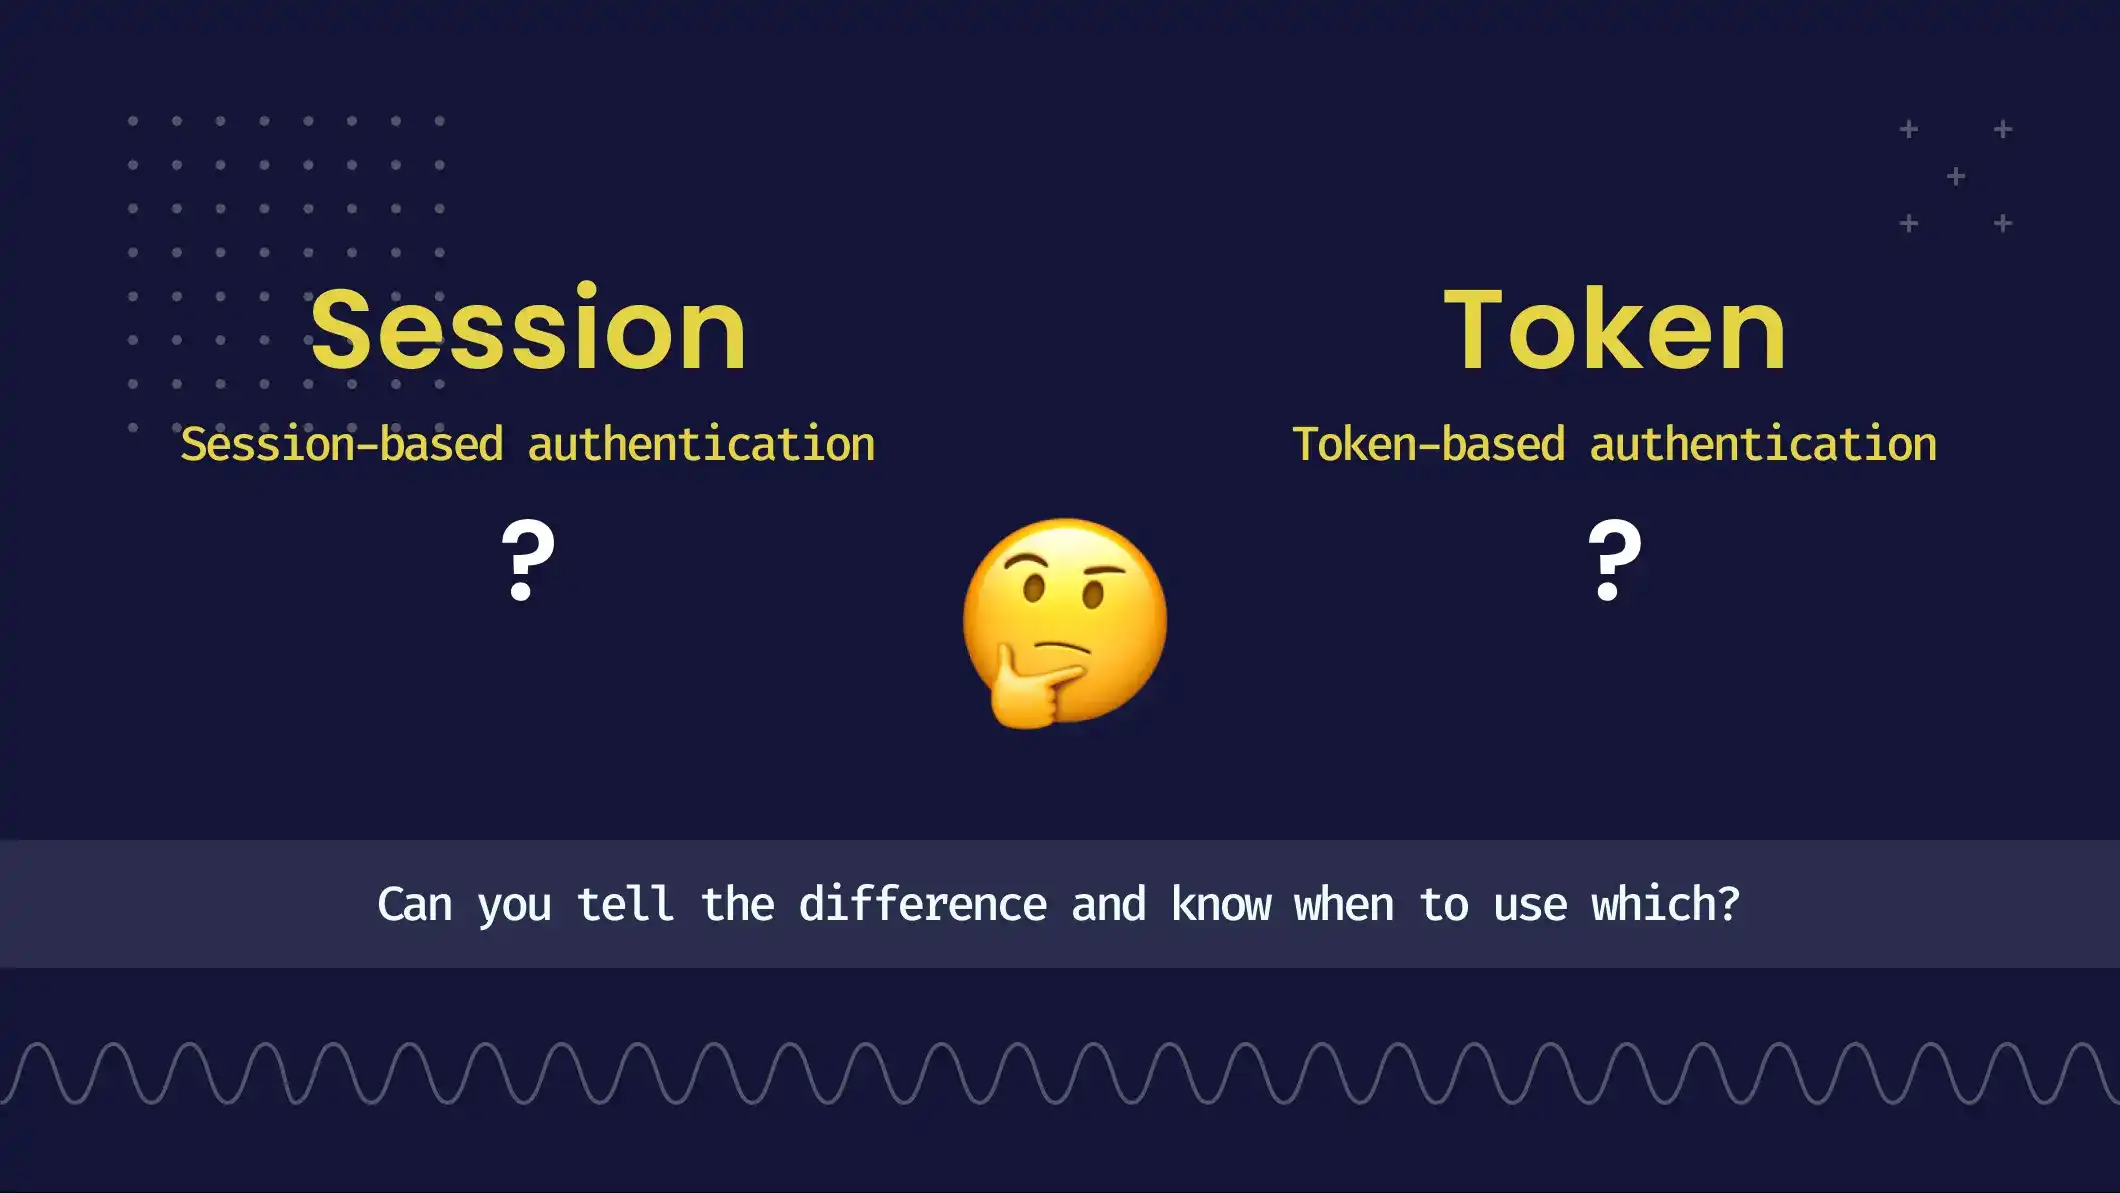 Comparing token-based authentication and session-based authentication